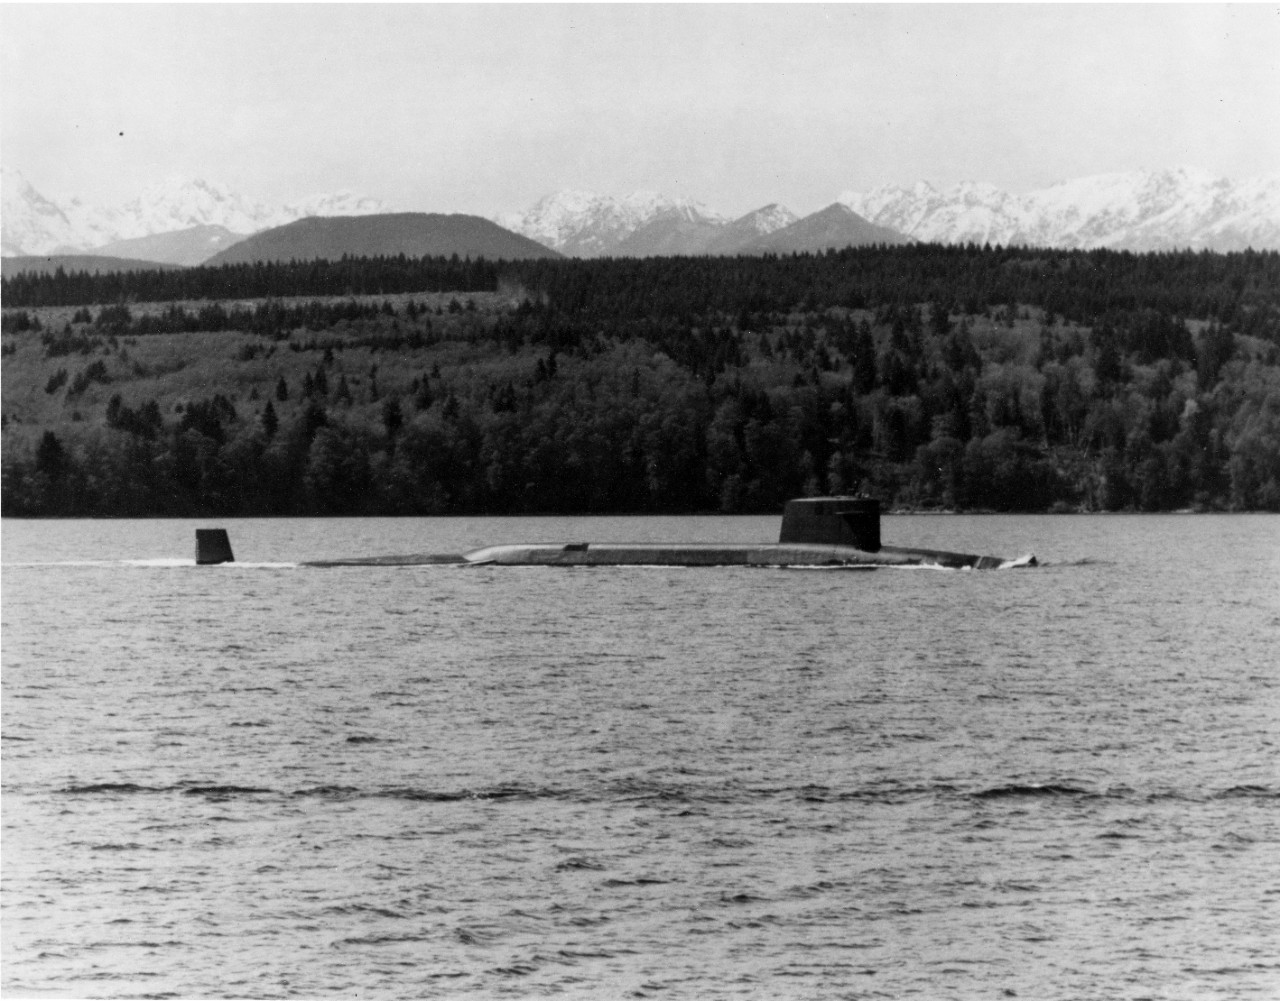 Naval Submarine Base Bangor, WA - a starboard beam view of the attack submarine USS Sam Houston (SSBN-609) underway in the Hood Canal. April 1, 1981.